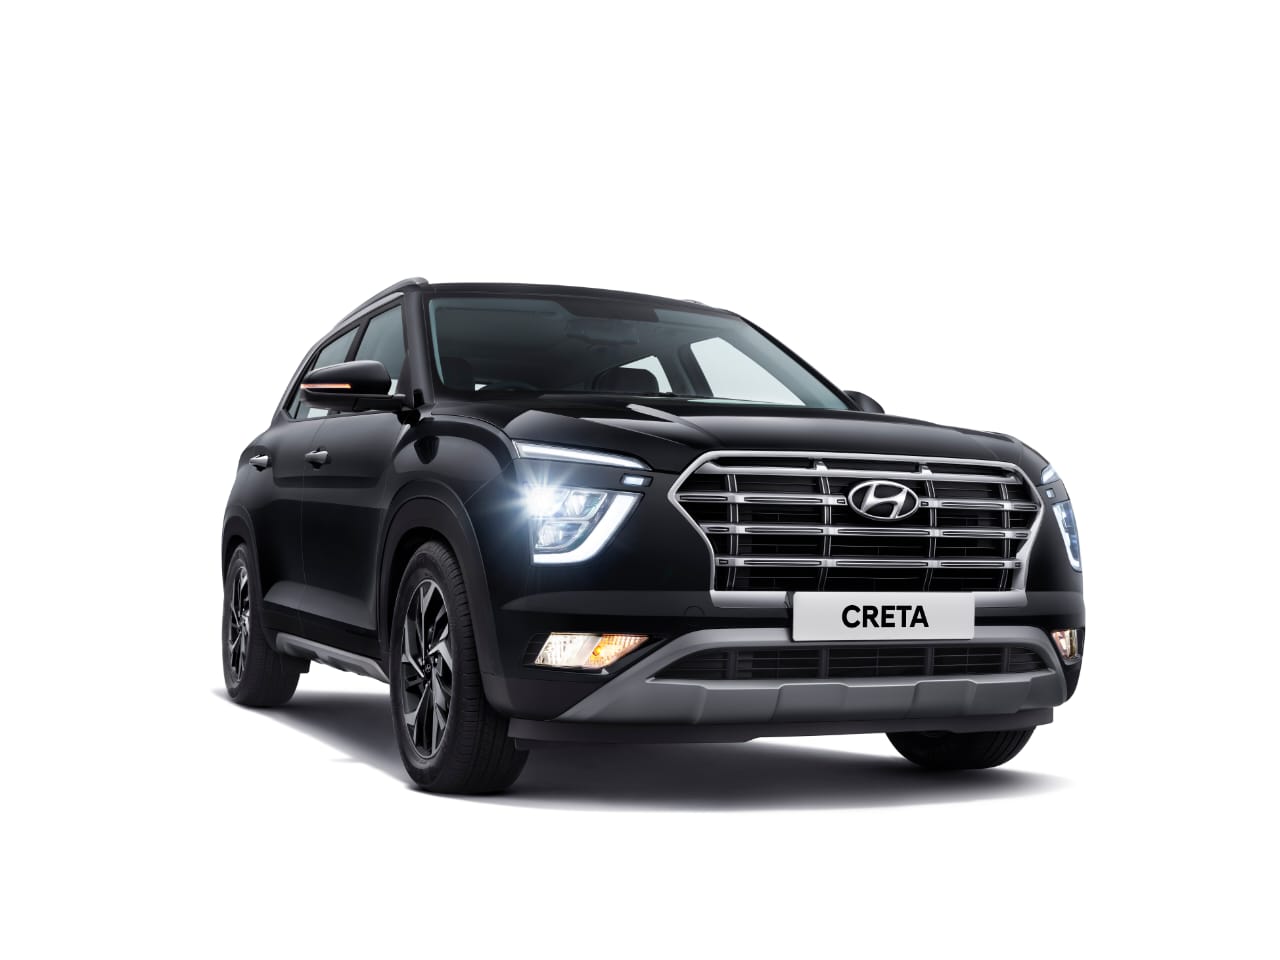 <p><strong>Hyundai India - Auto Expo 2020, Day 2:</strong></p>

<p>The new&nbsp;Hyundai Creta is a great example of how lights can be used in the styling to enhance the looks.</p>